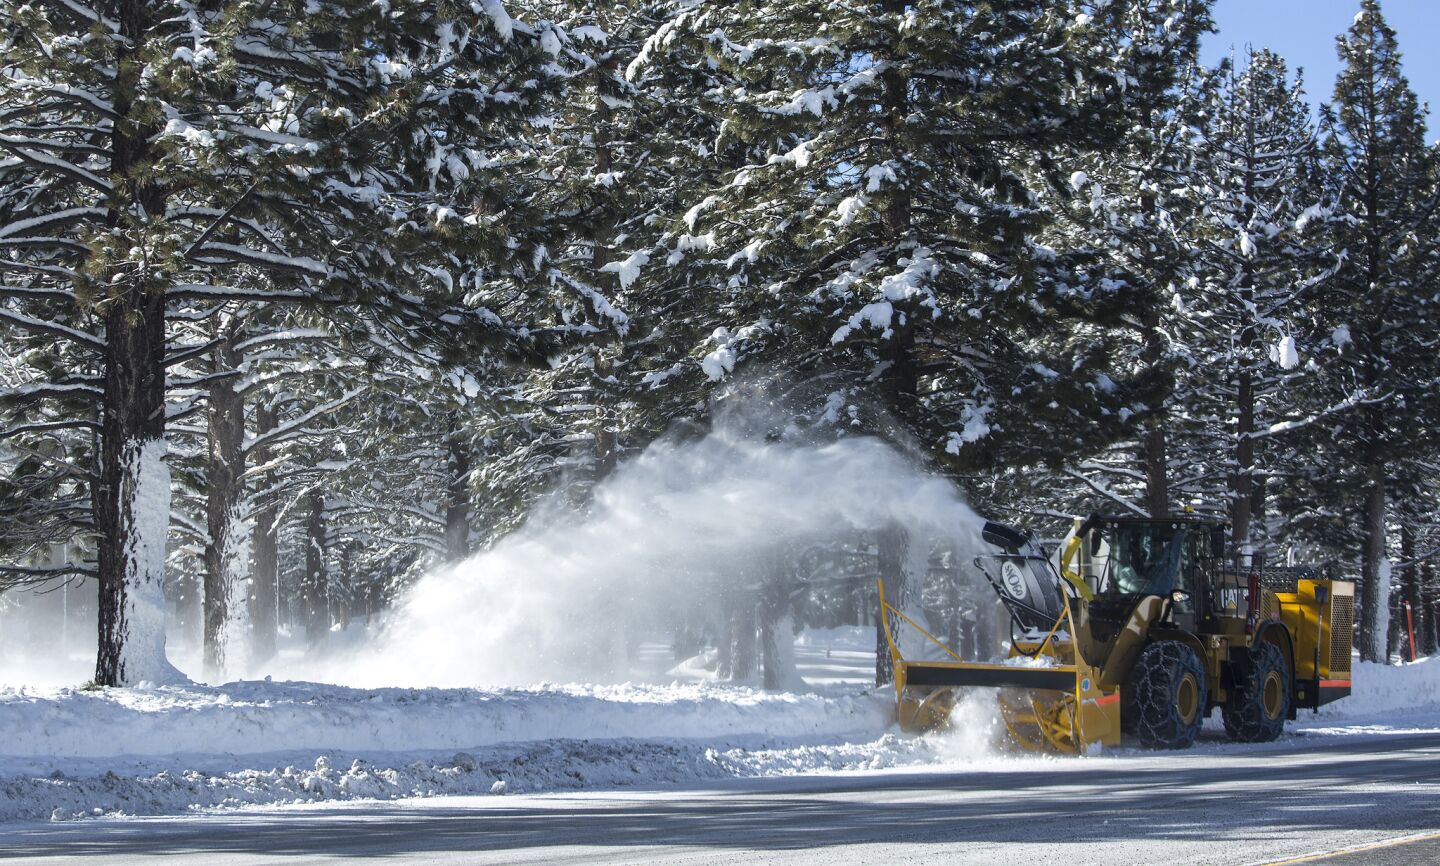 A plow removes snow from state Highway 203 in Mammoth Lakes.